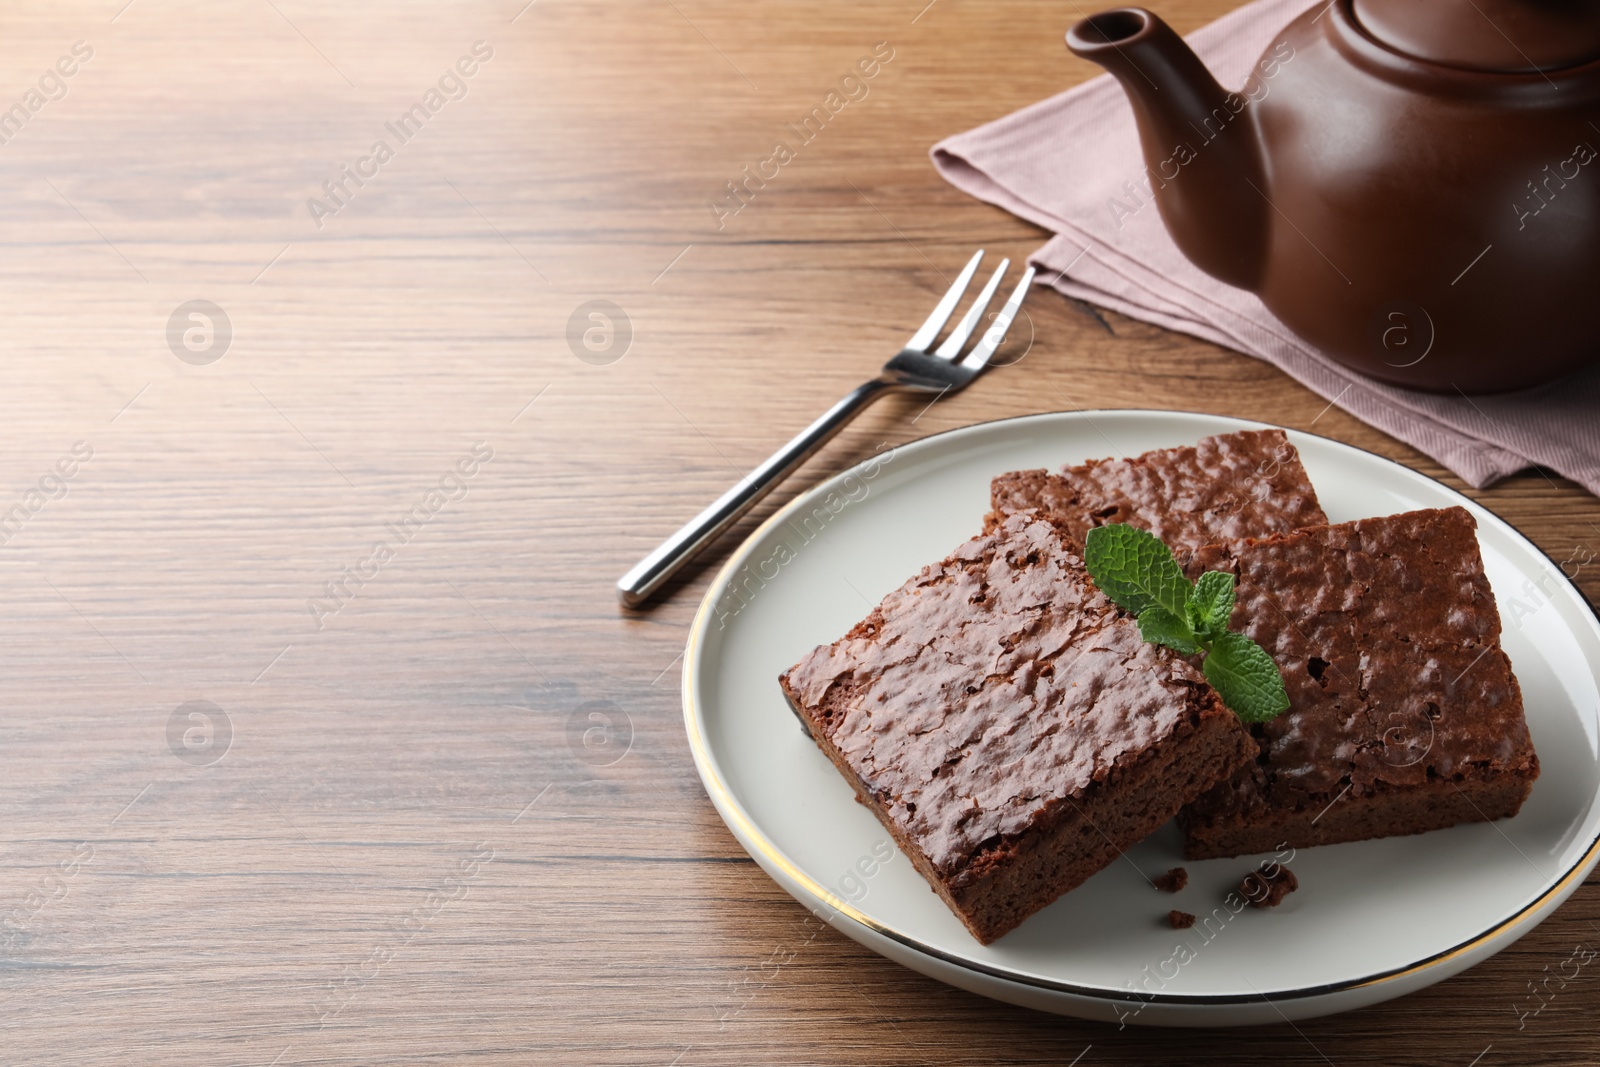 Photo of Delicious chocolate brownies with fresh mint served on wooden table. Space for text